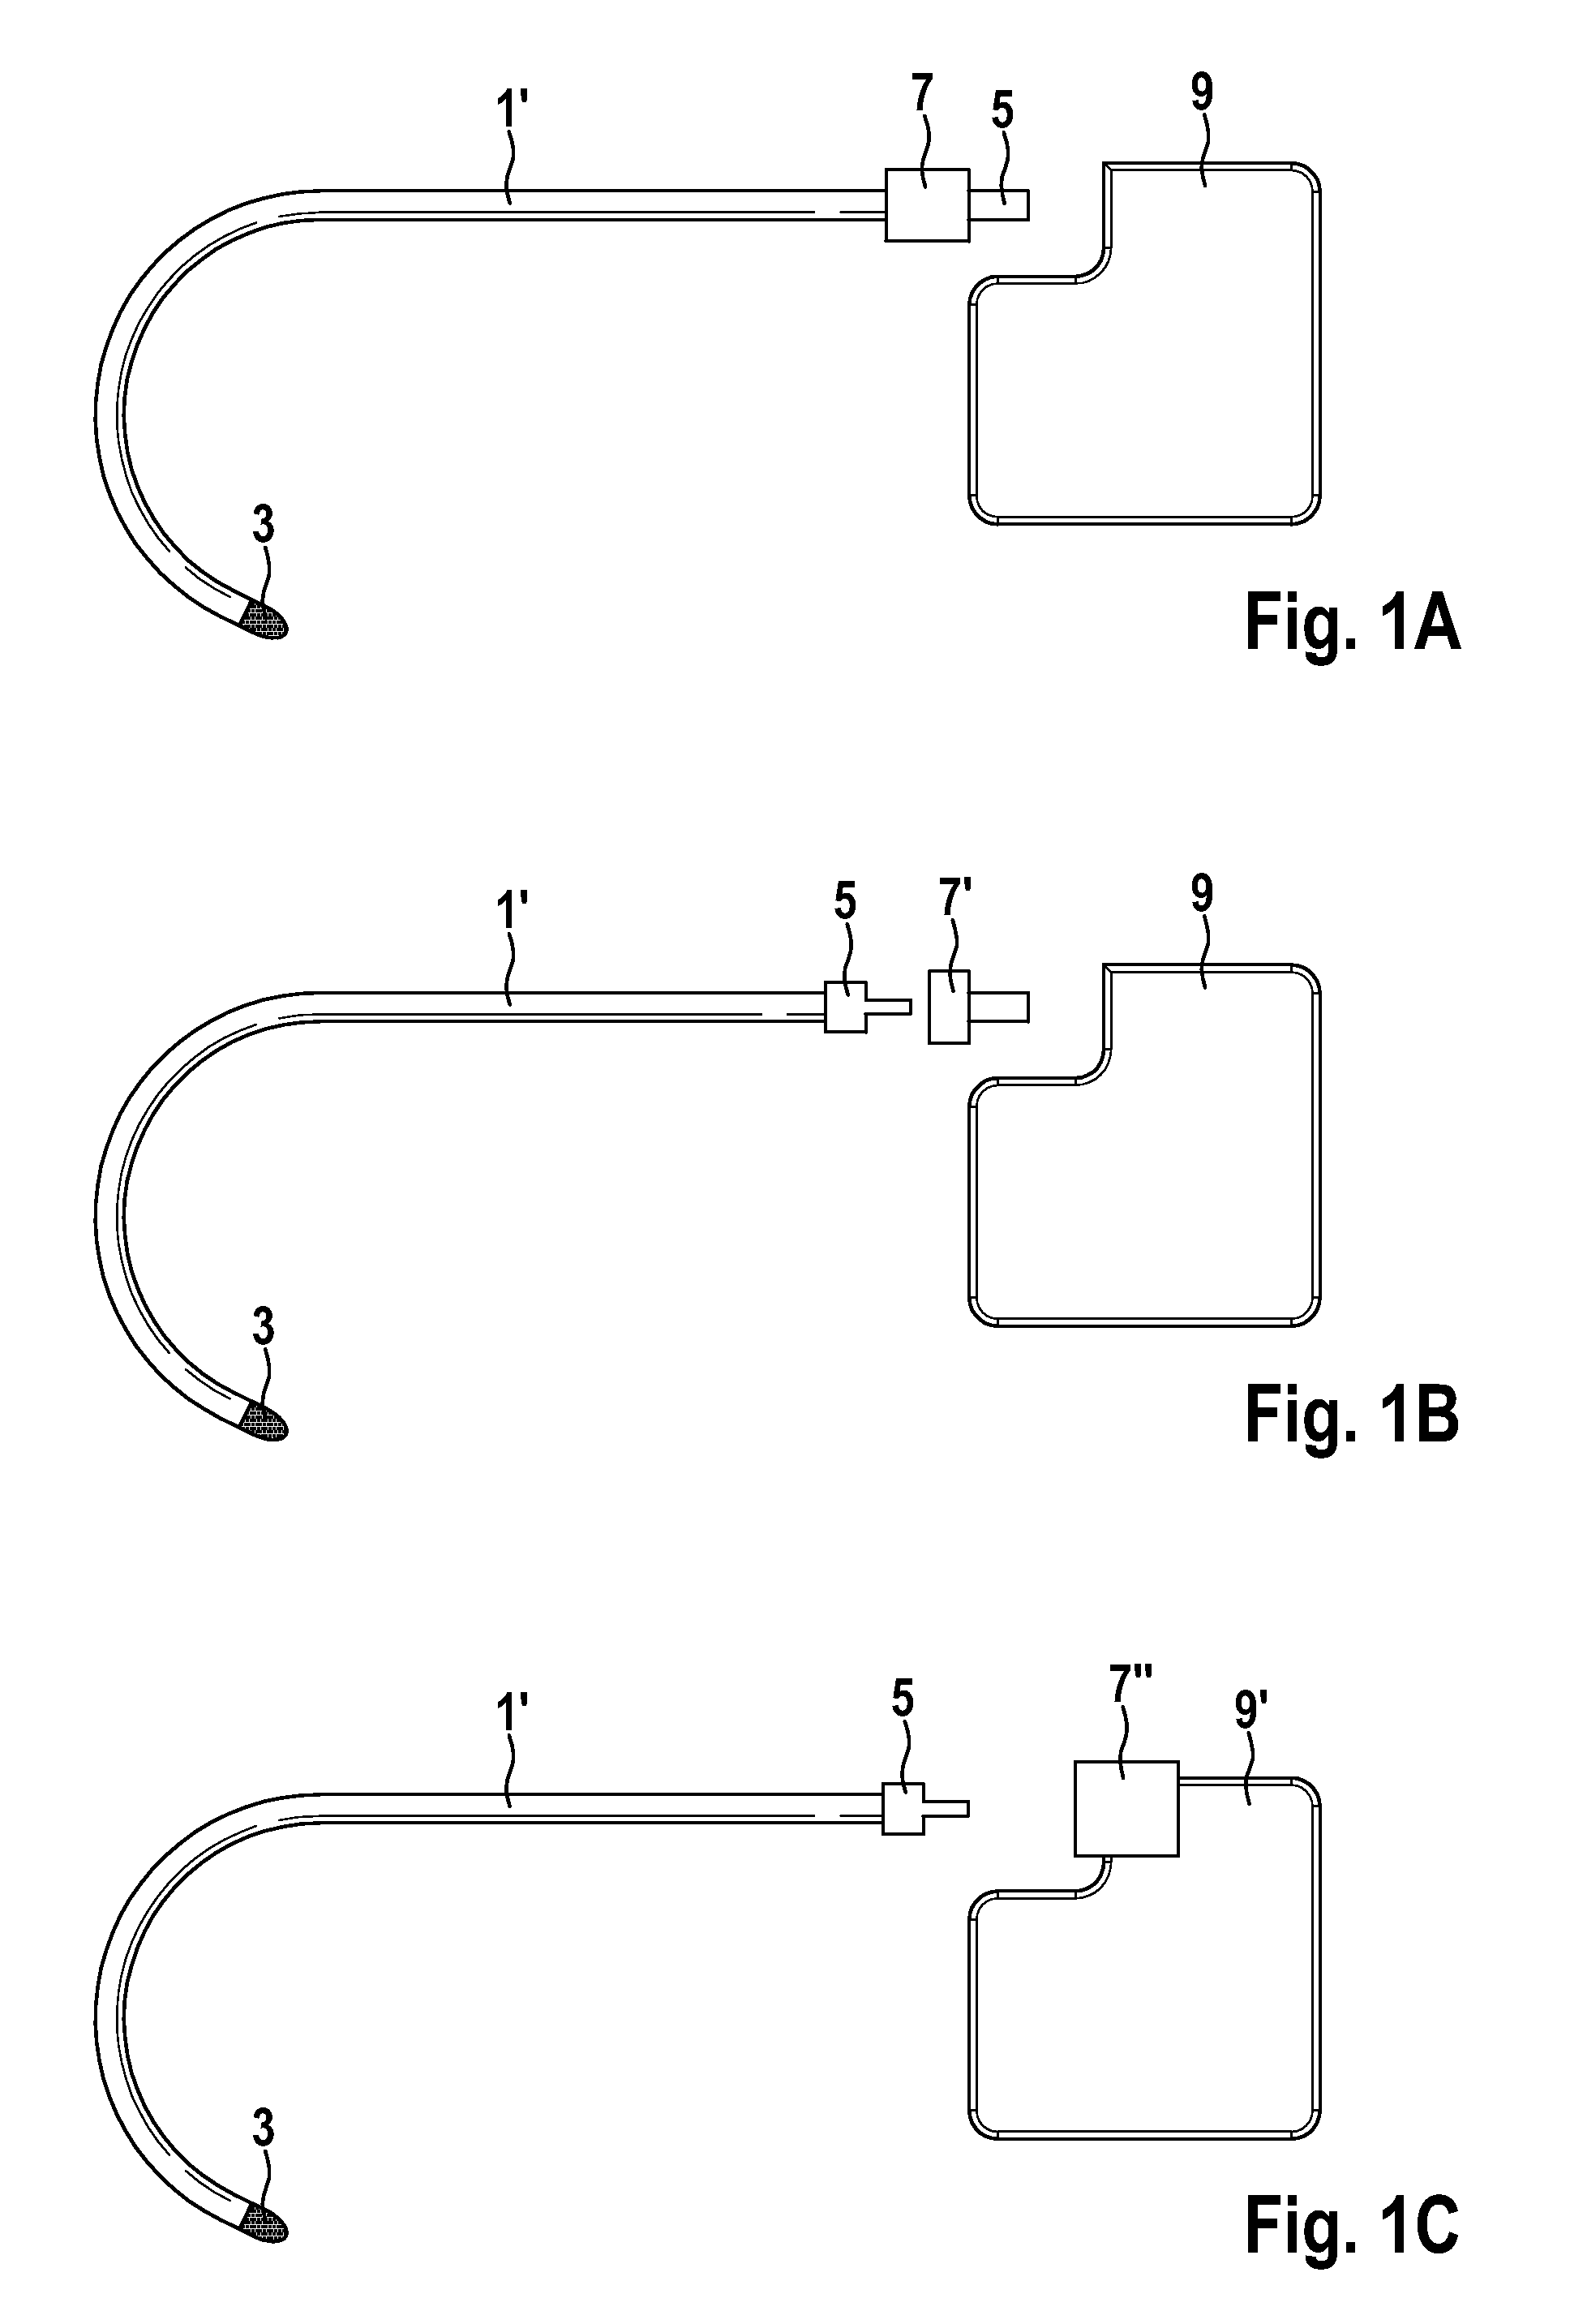 Field decoupling element for use with an implantable line and implantable medical device